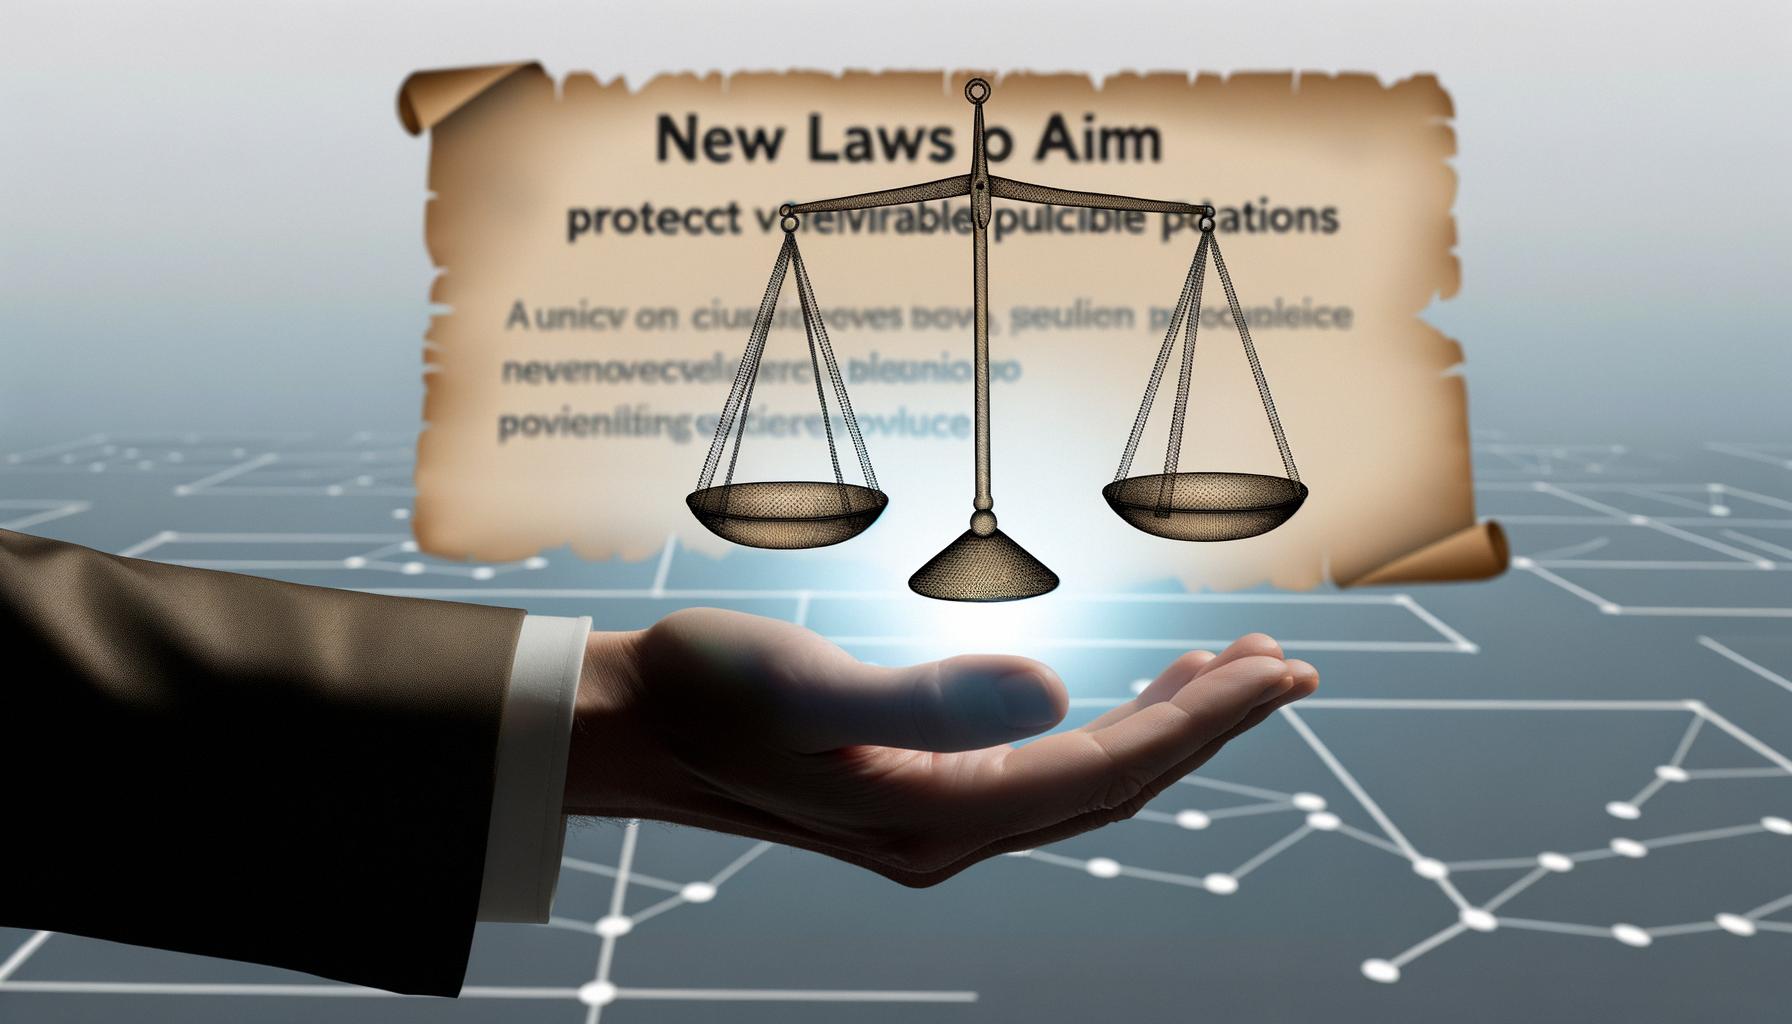 New laws aim to protect vulnerable populations Balanced News